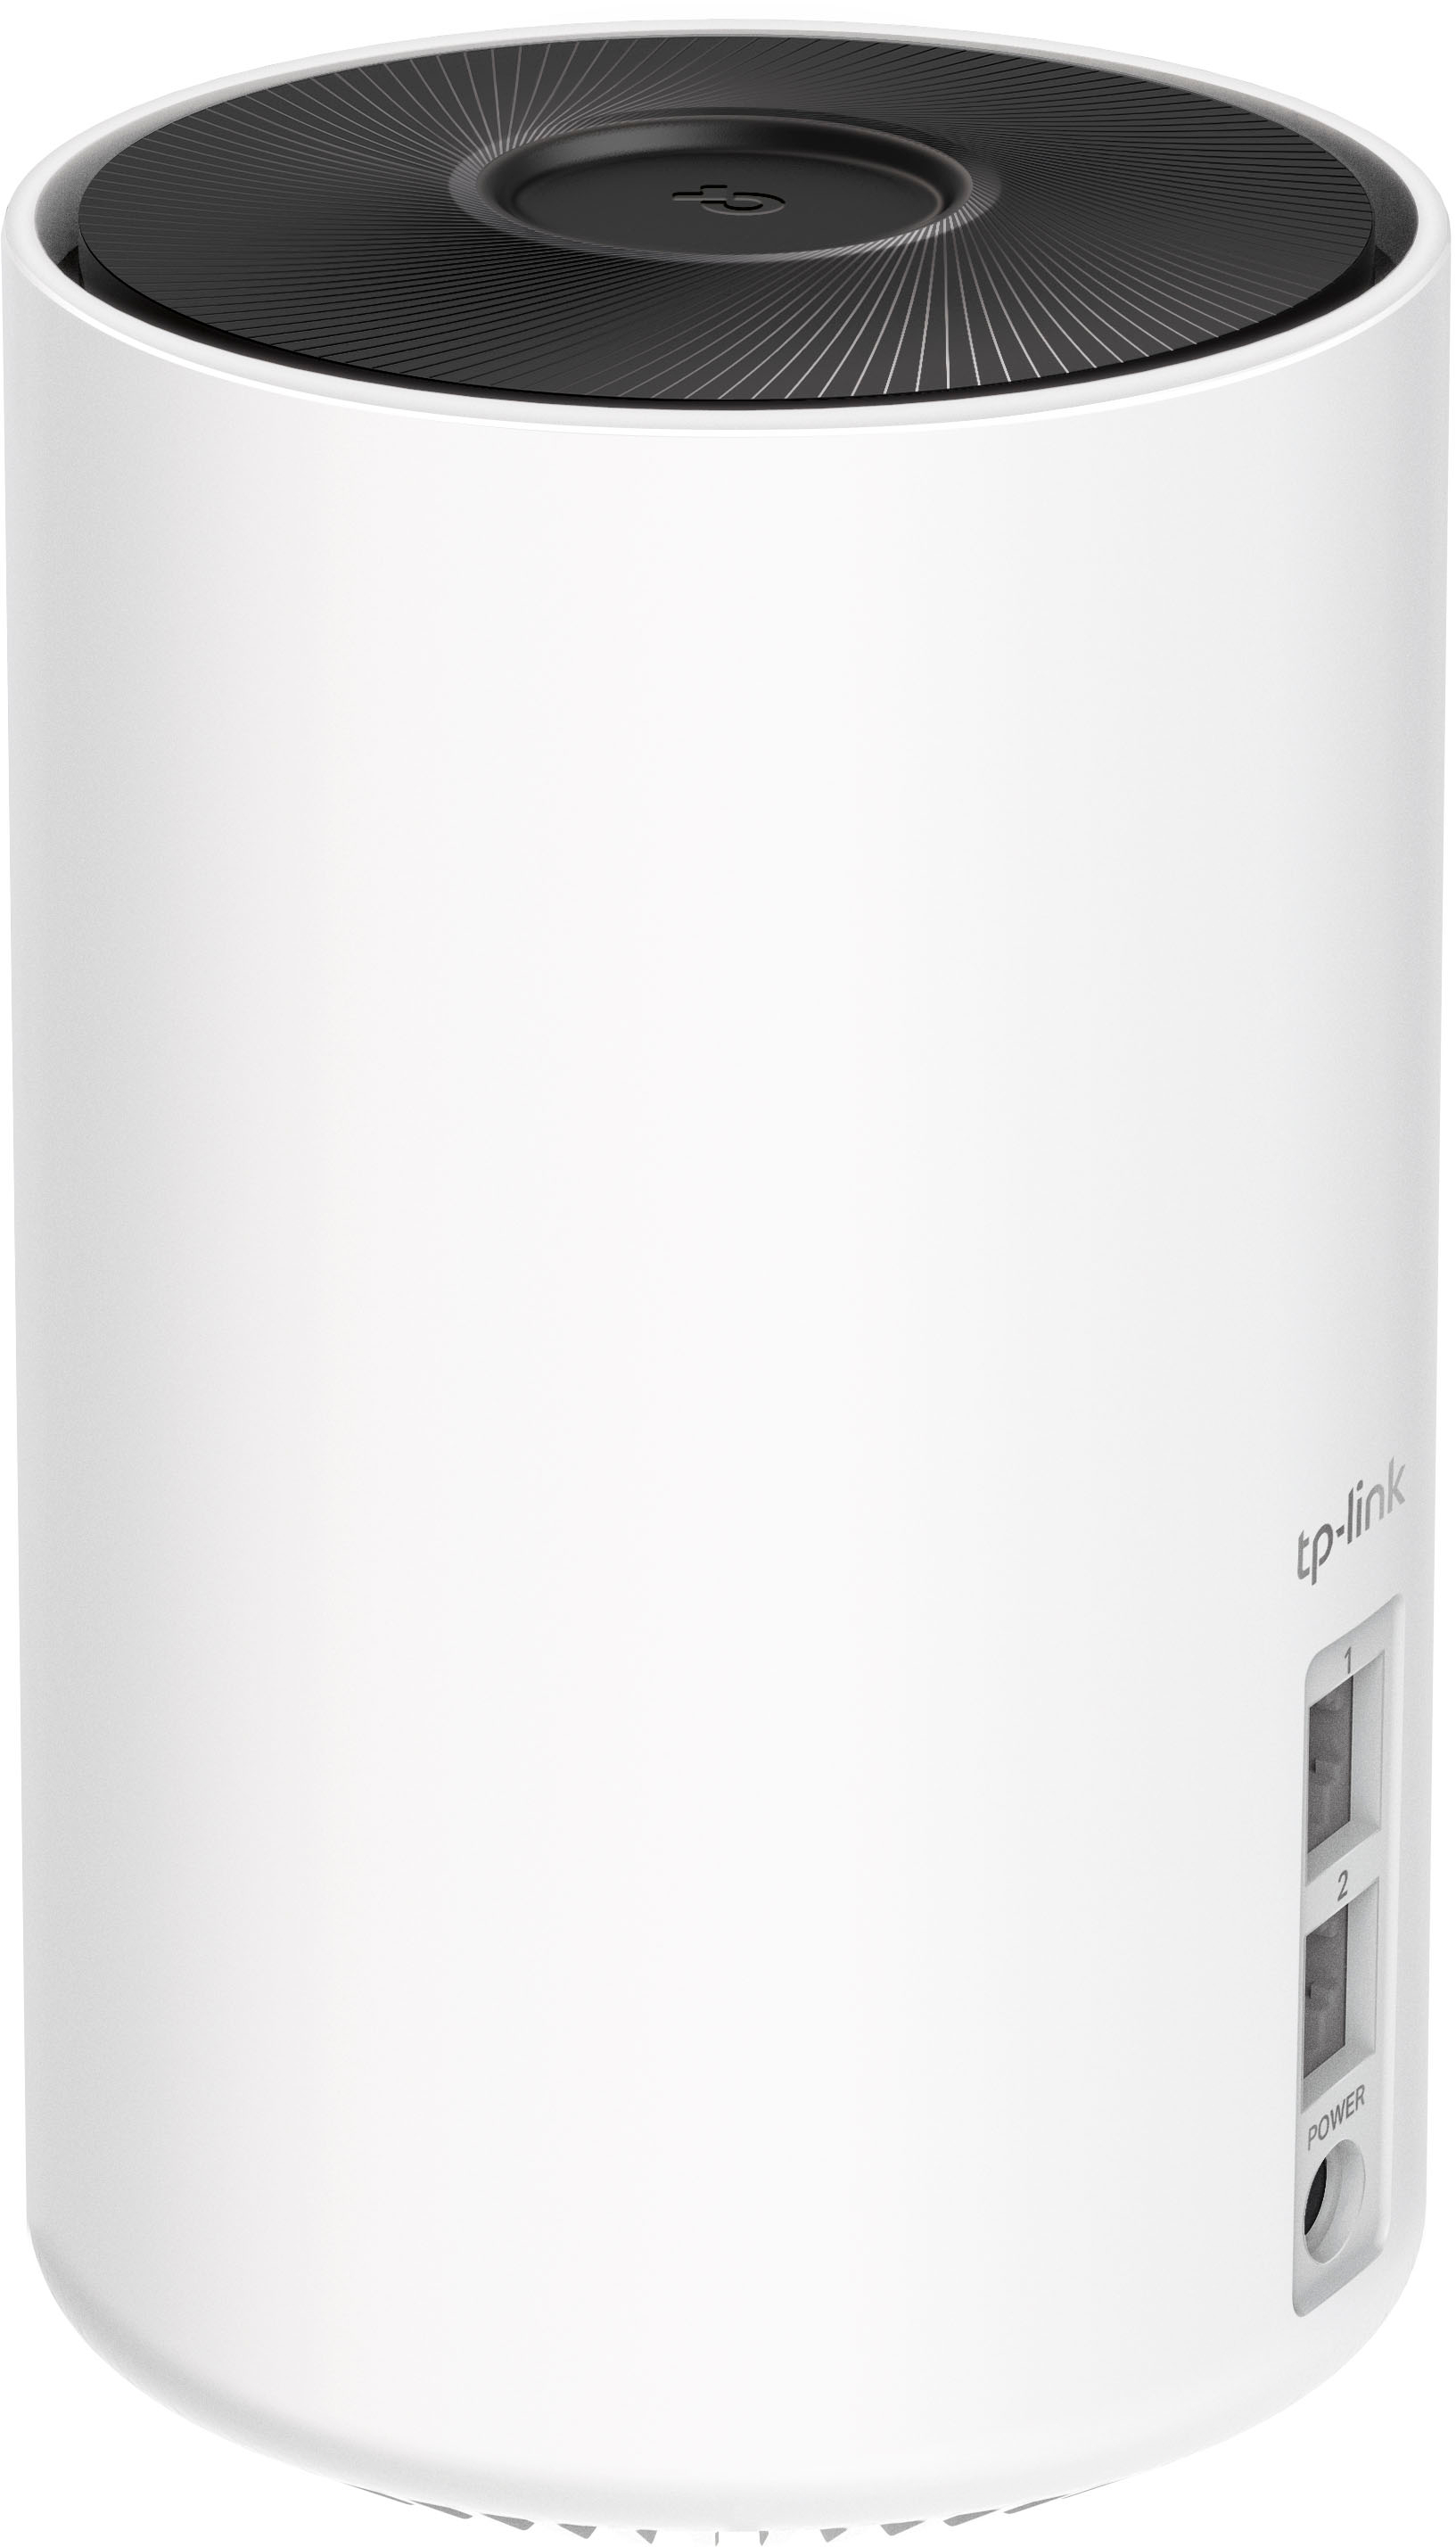 Deco X3600, AX3600 Whole Home Mesh WiFi 6 System